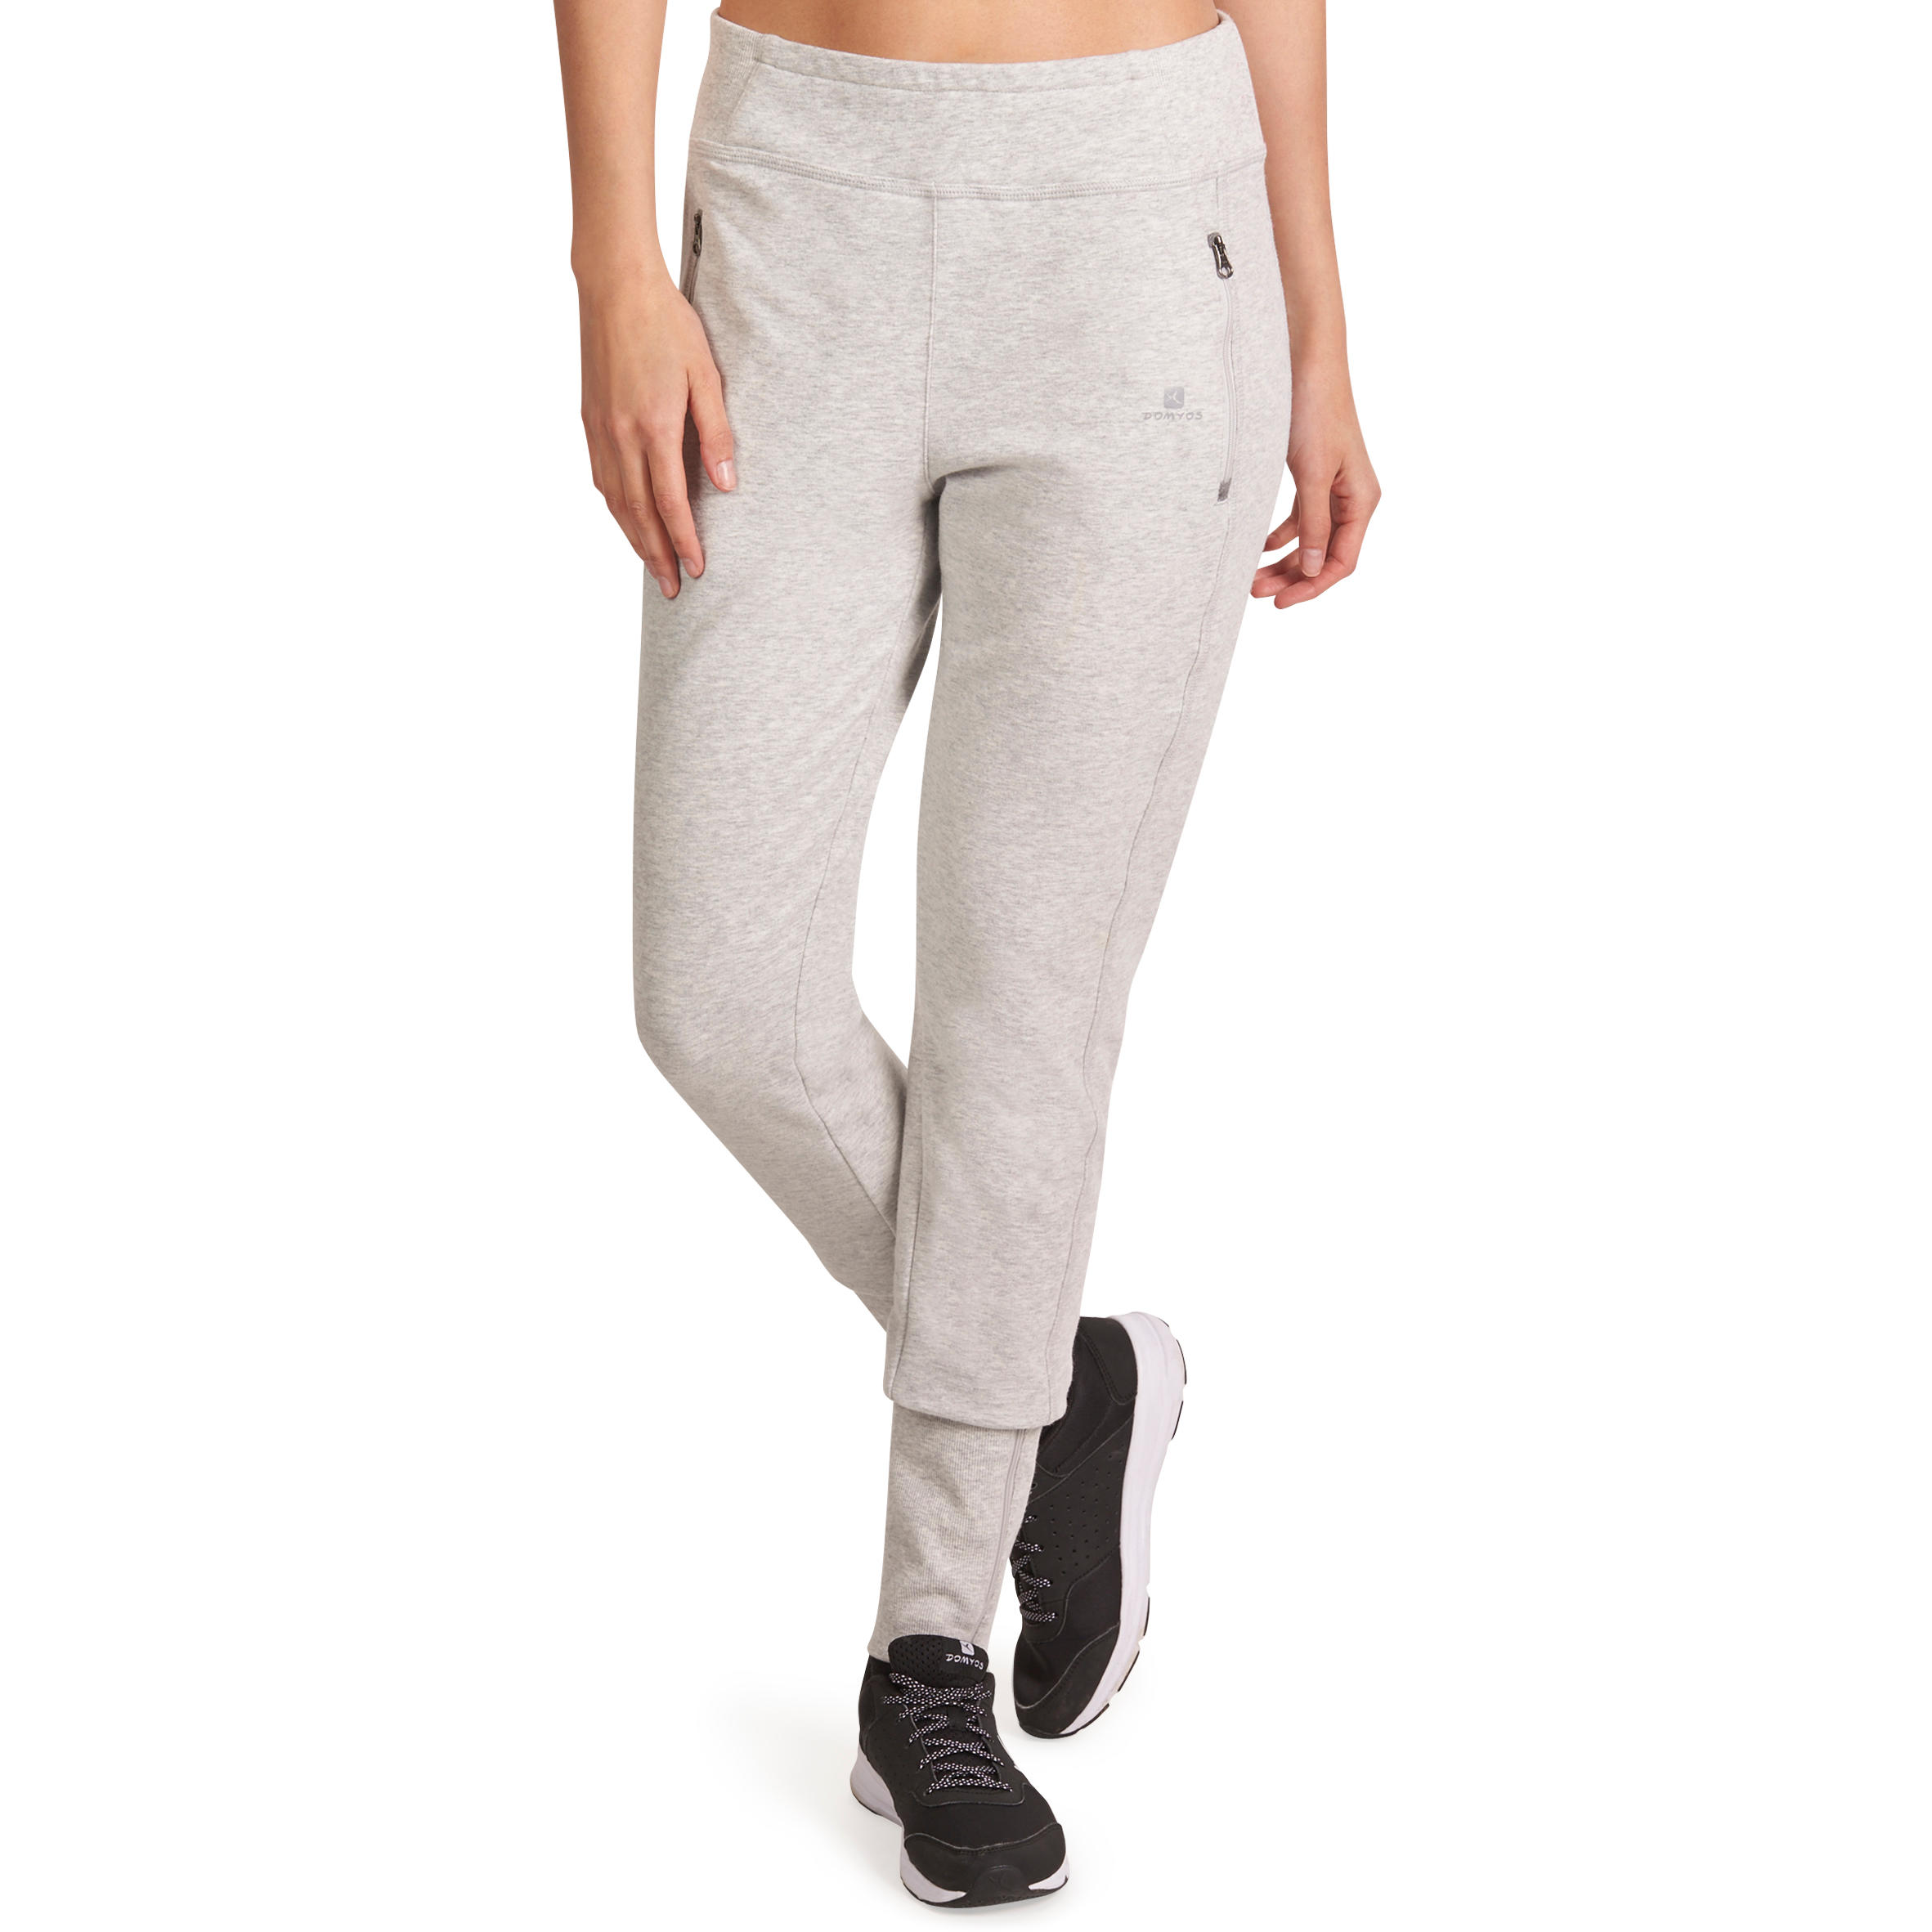 920 Women's Slim-Fit Gym & Pilates Bottoms with Zip Ankles - Light Mottled Grey 2/14